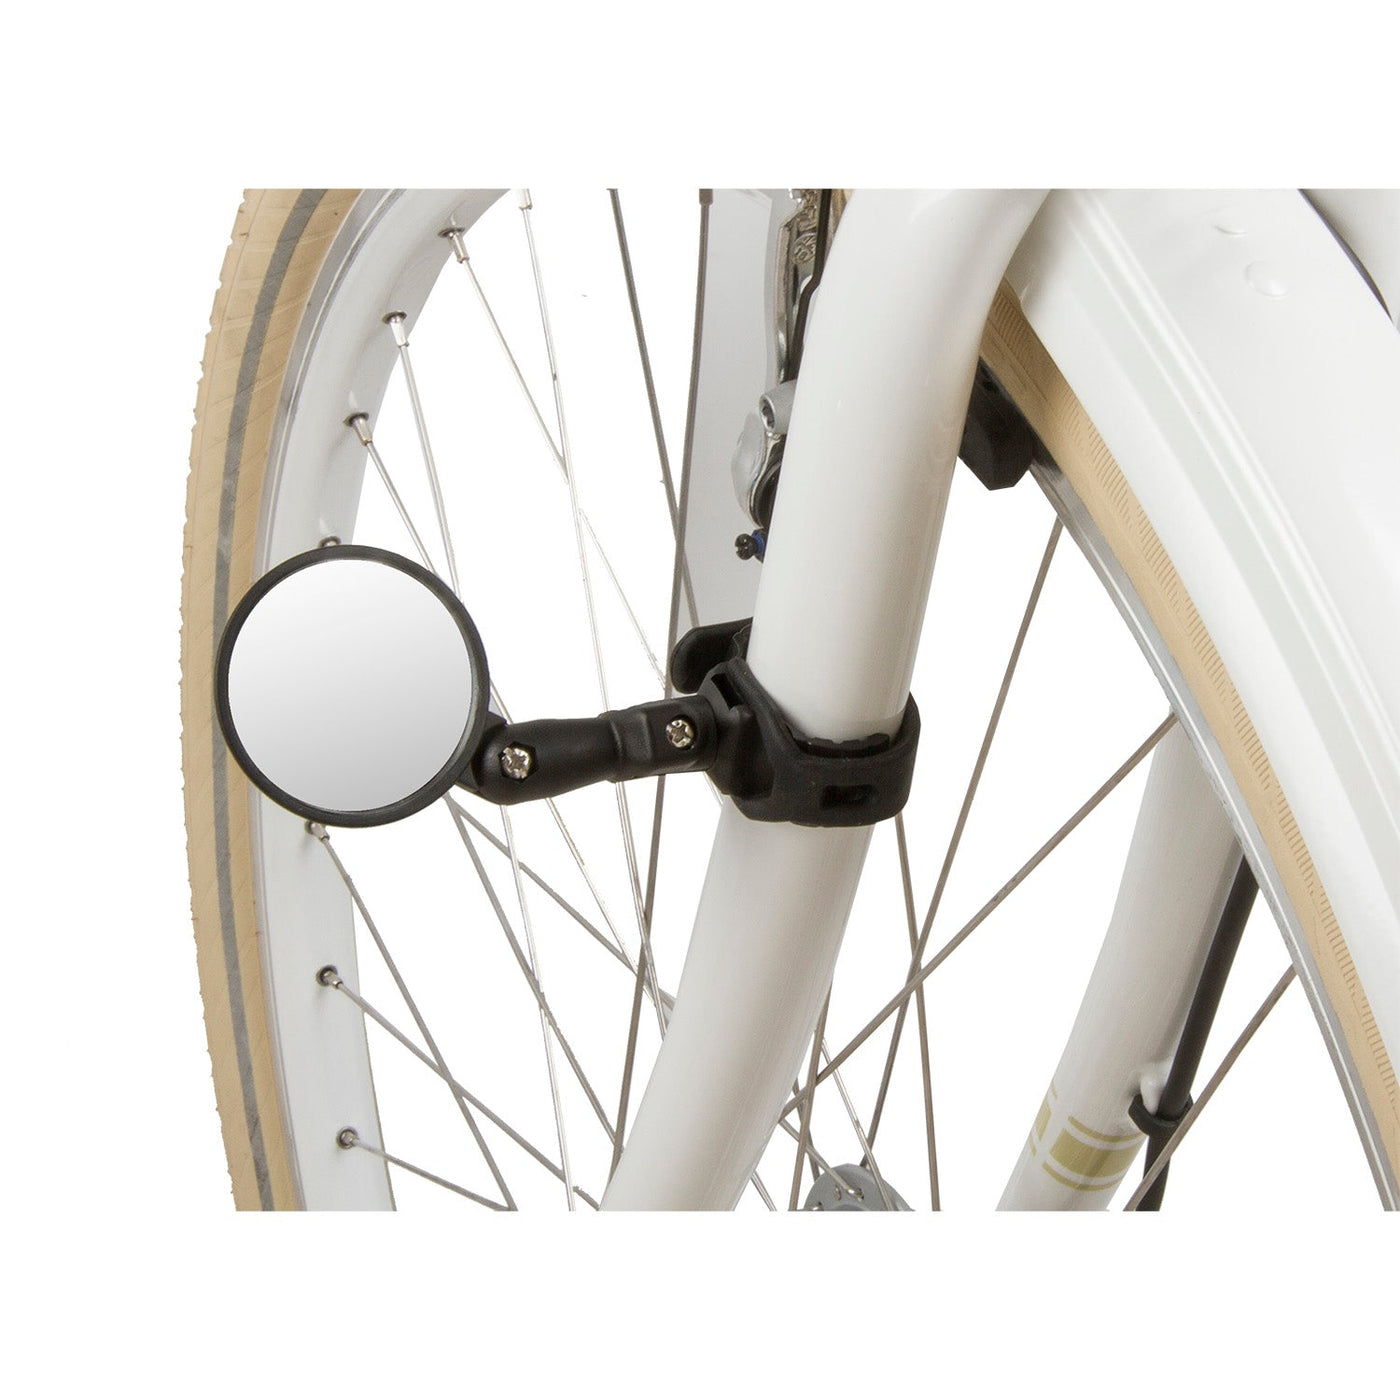 M-Wave Spy Mini Bicycle Mirror - Cyclop.in